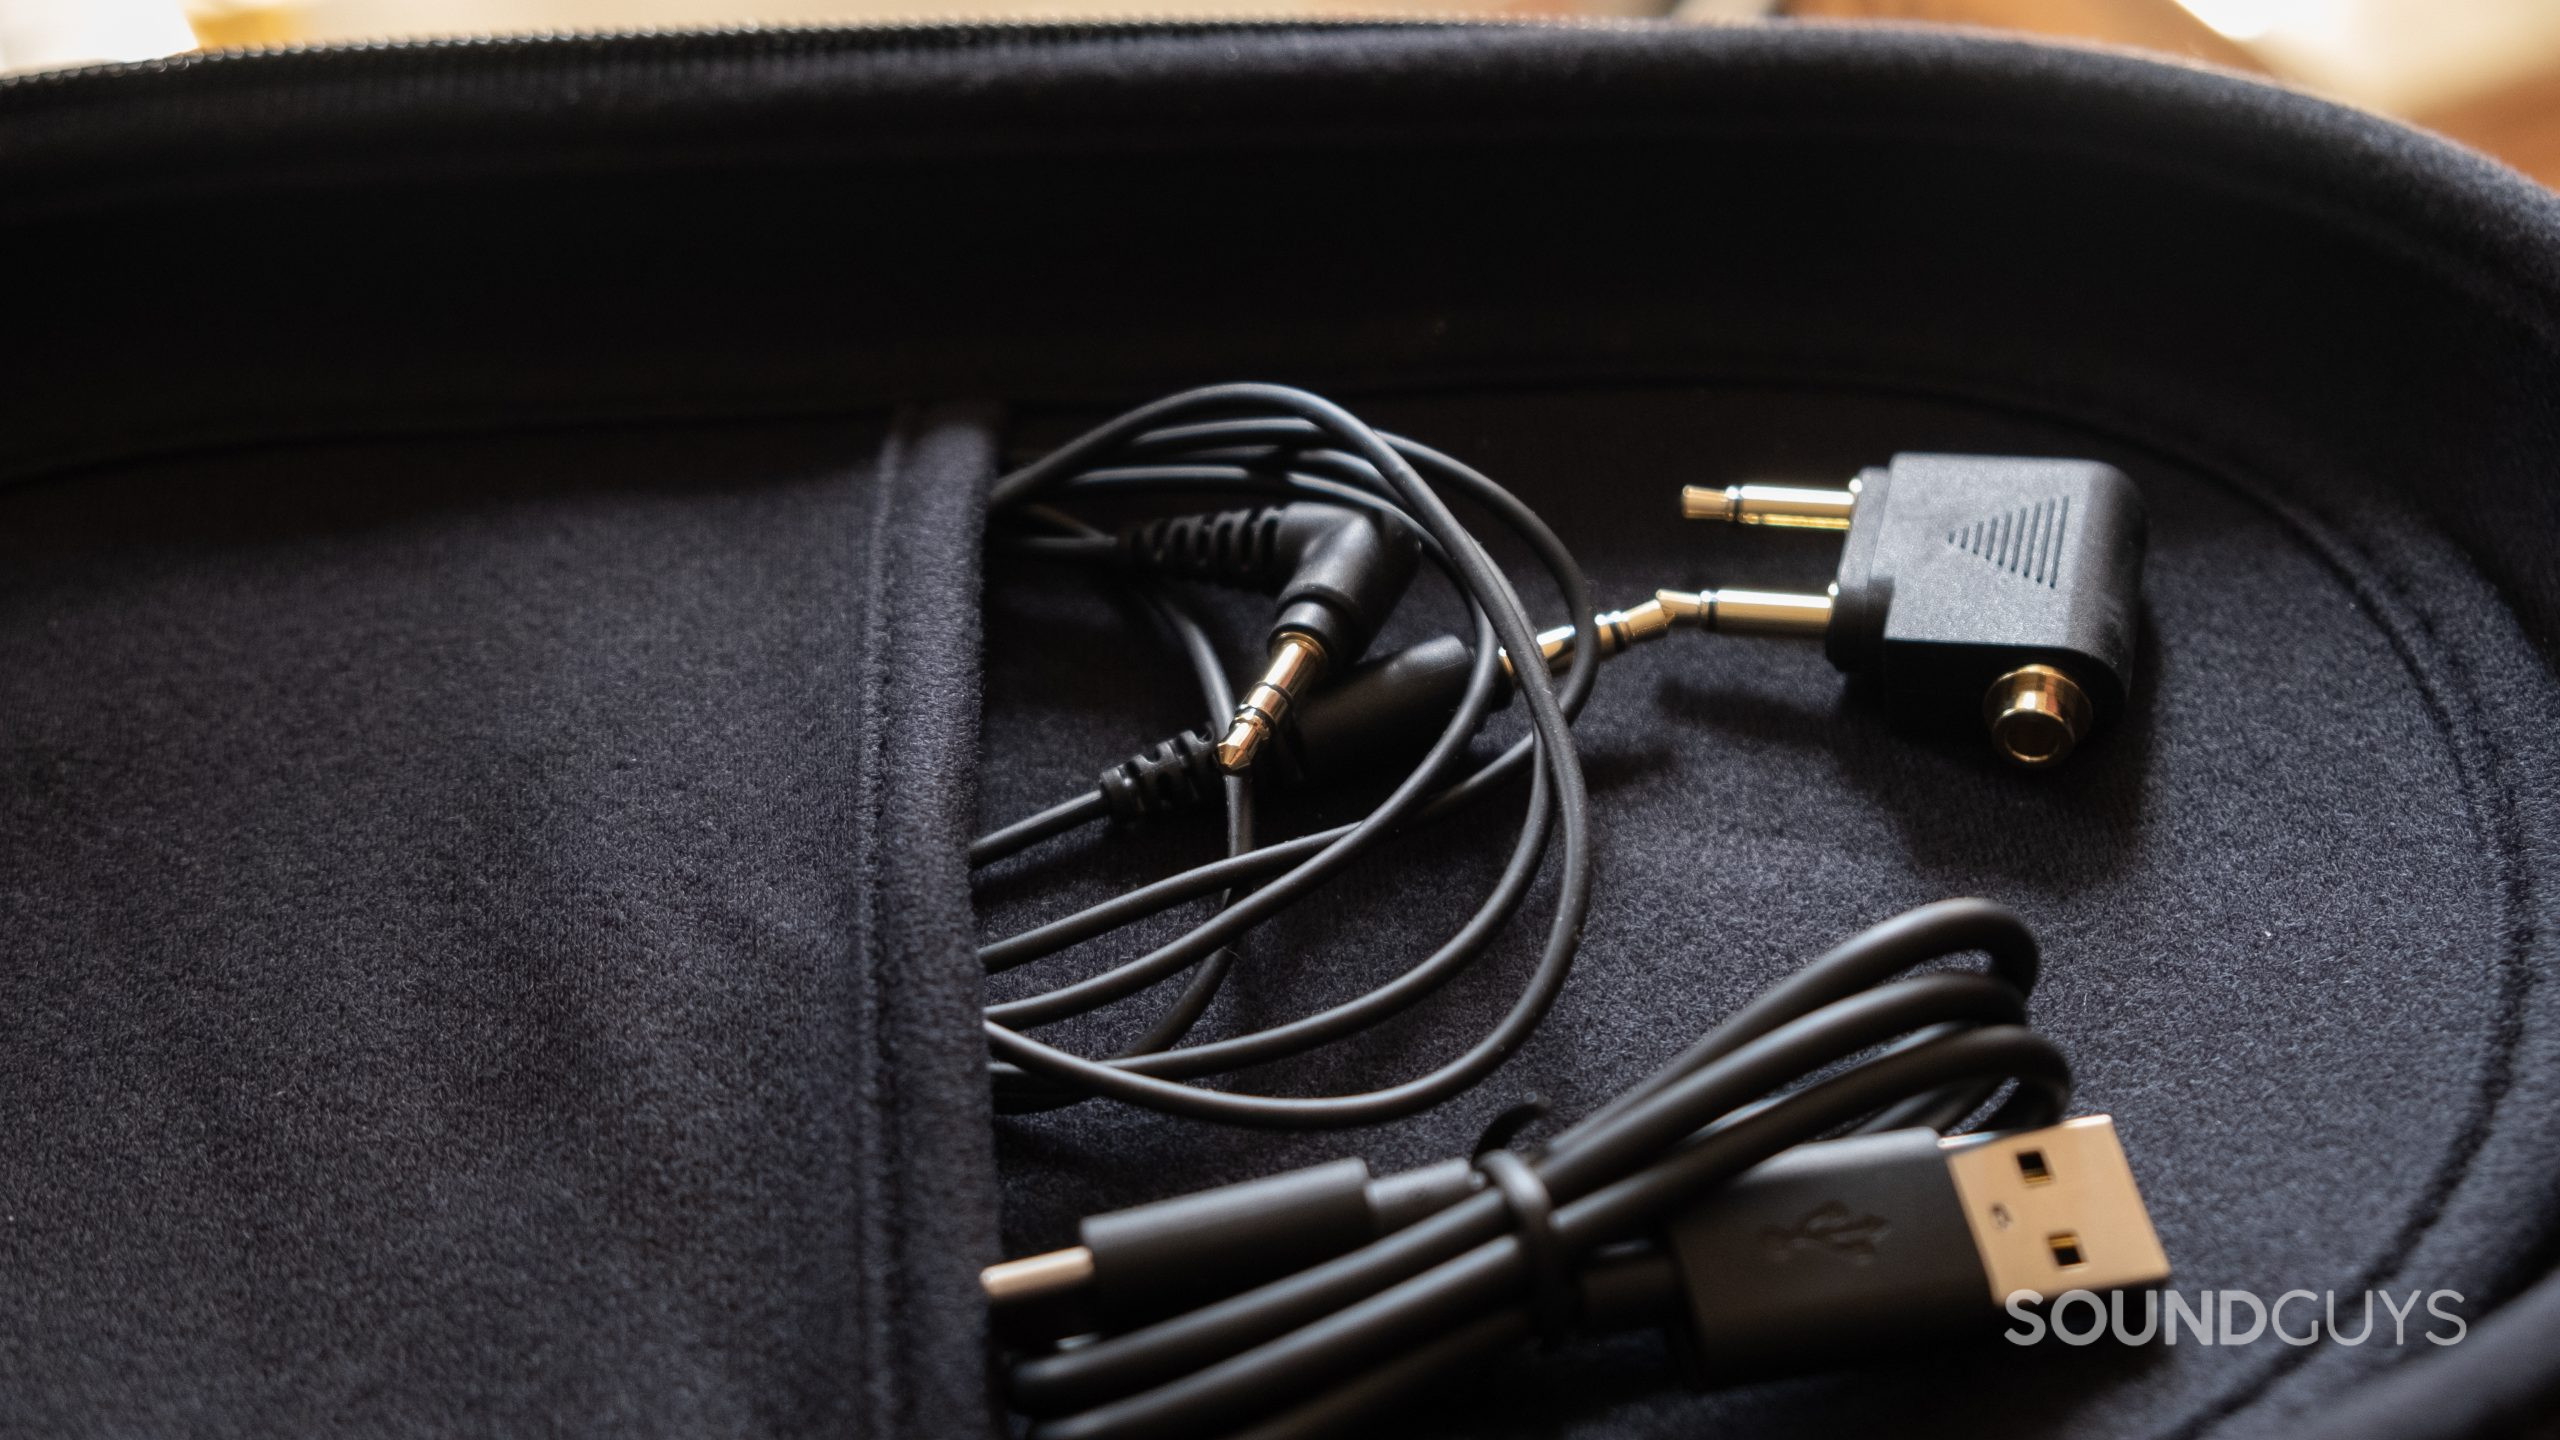 In the included case the Yamaha YH-E700A fit the 3.5mm cable, USB-C cable, and airplane adapter.